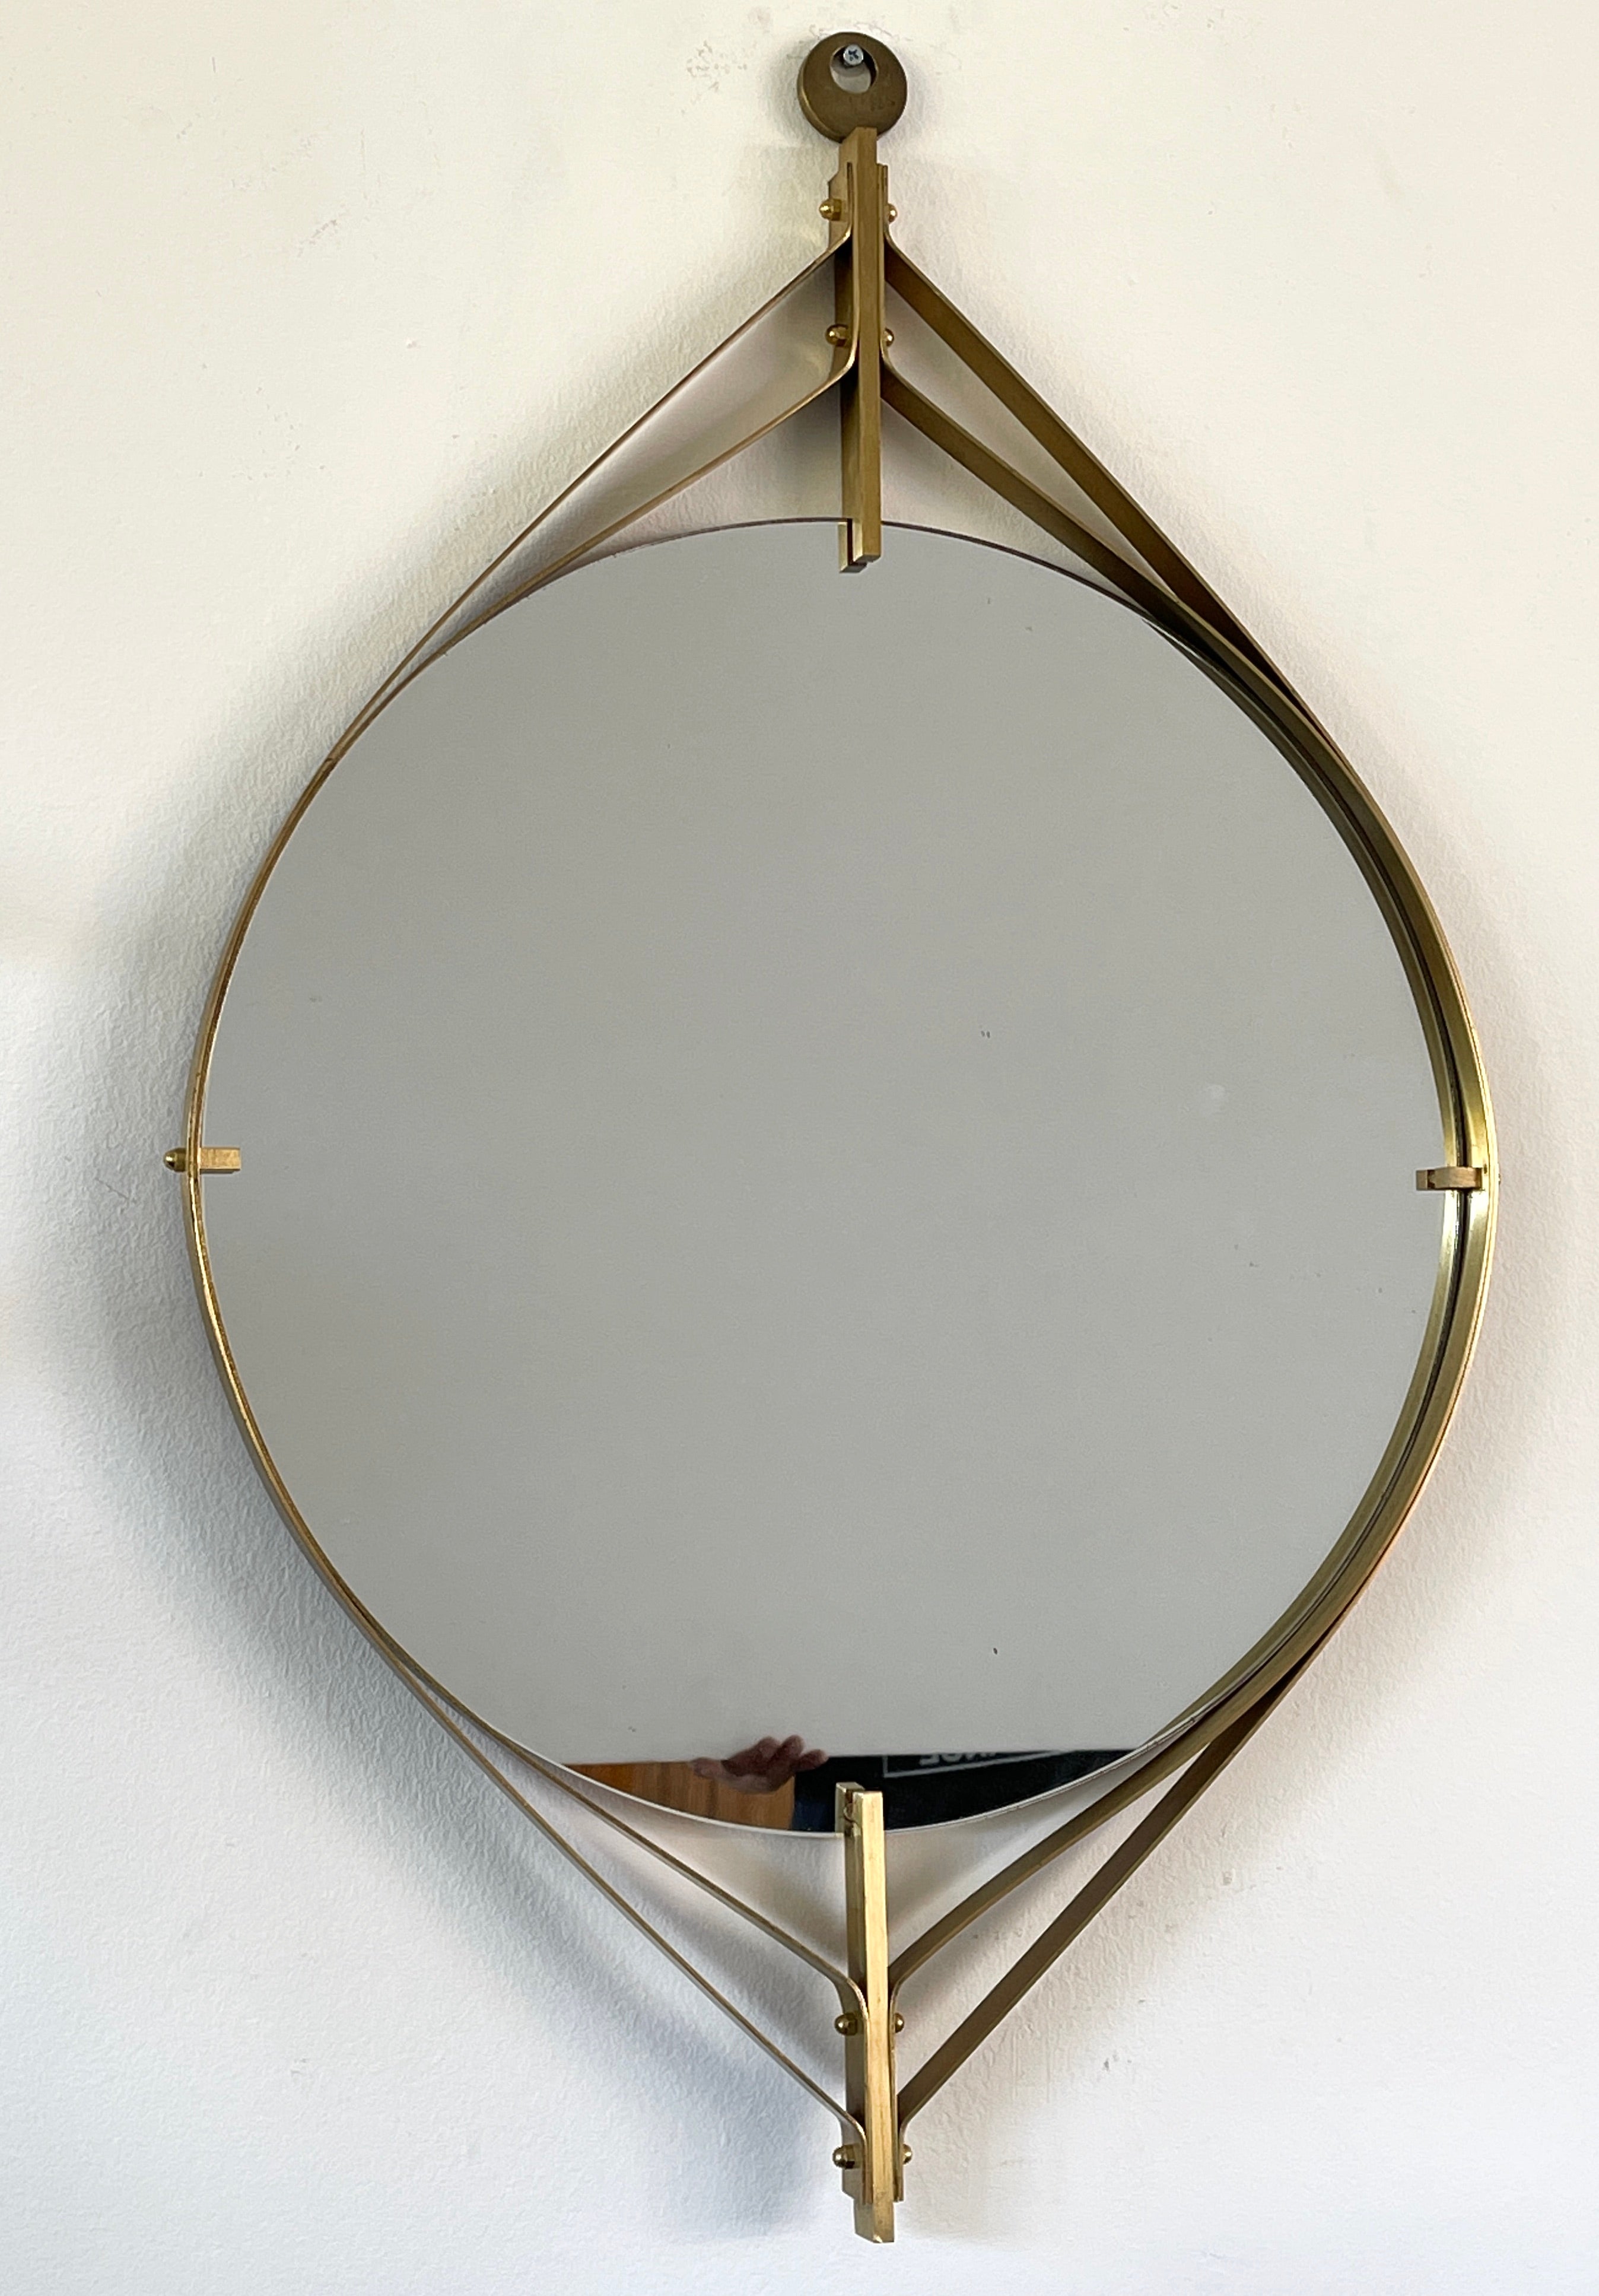 1950's Italian brass mirror floating in an intricate concentric design.